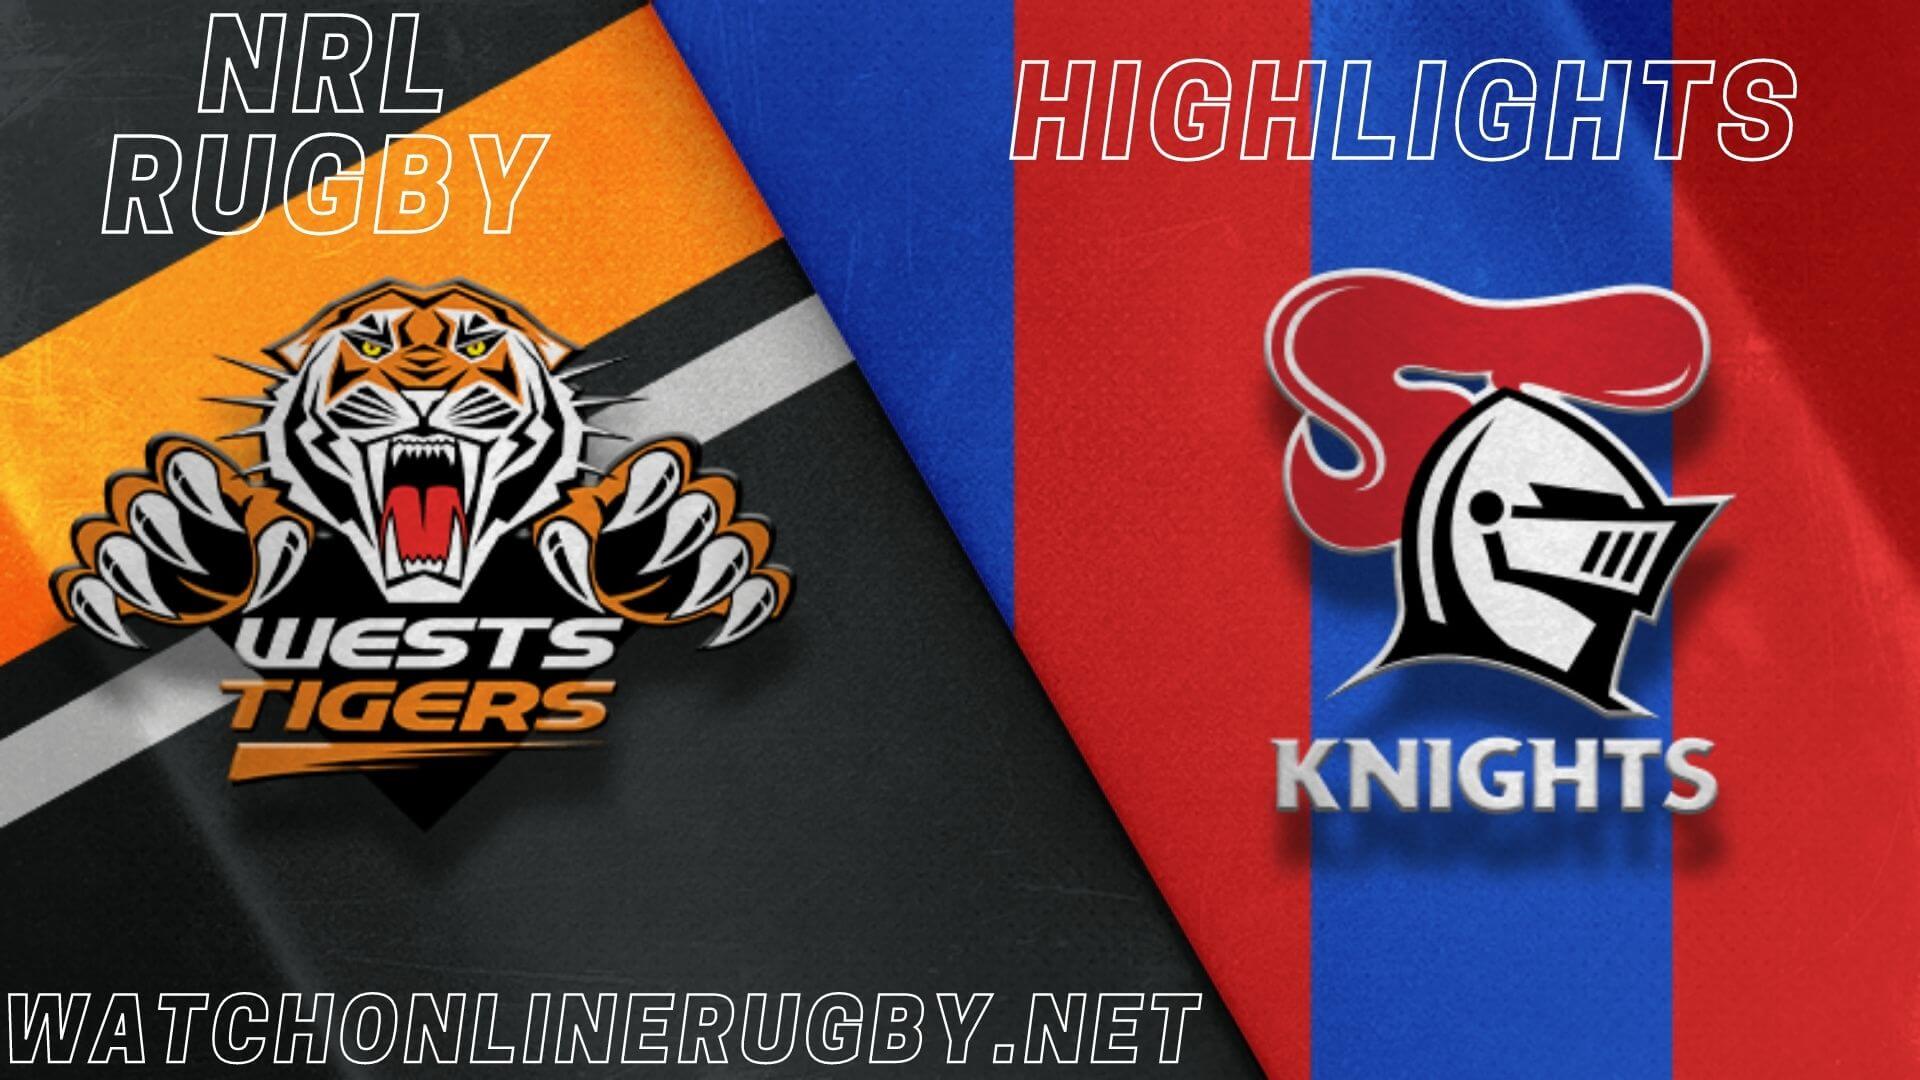 Knights Vs Wests Tigers Highlights RD 2 NRL Rugby